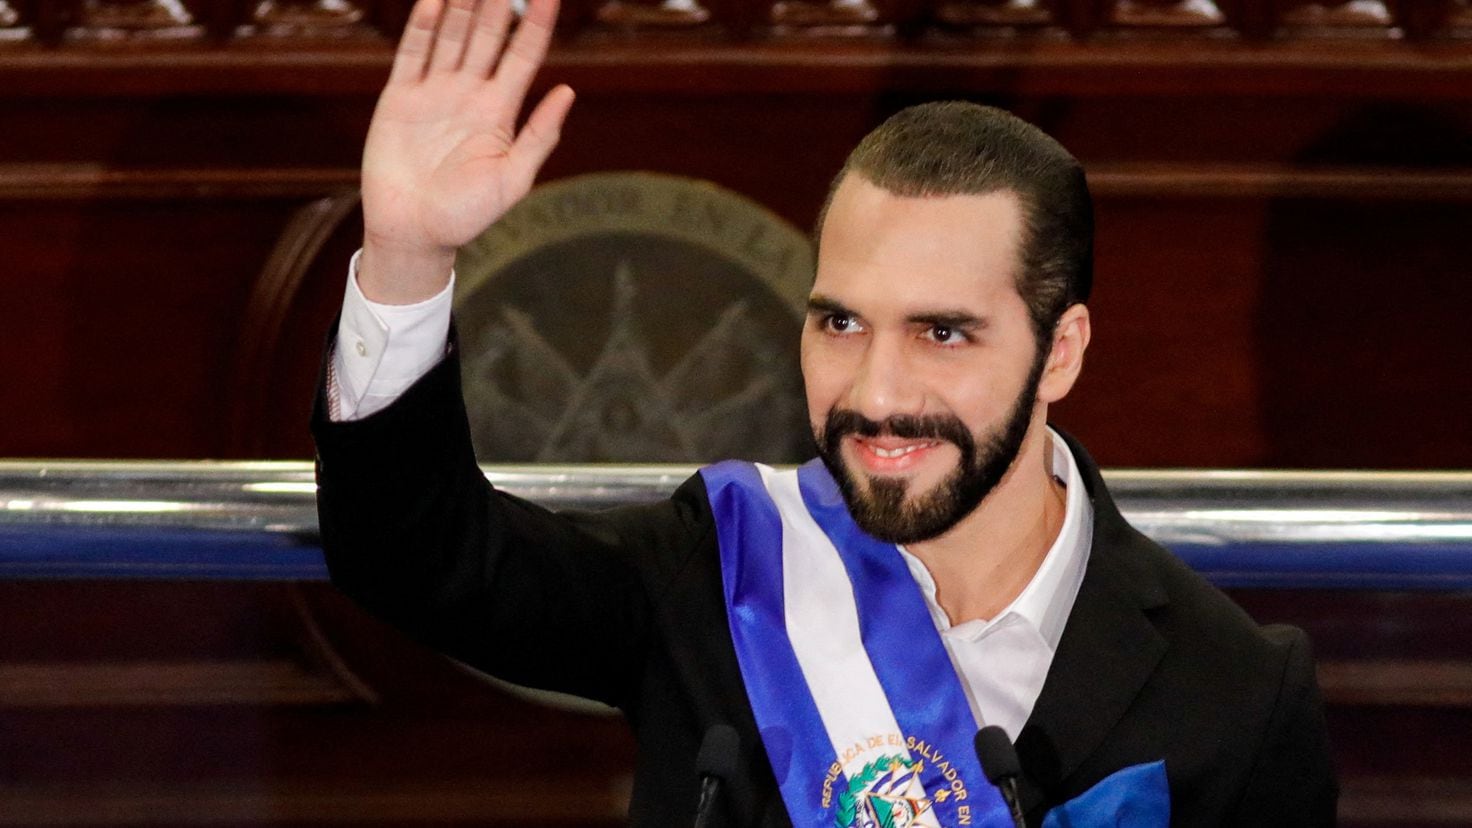 This is the luck of El Salvador’s president, Nayeb Bugele